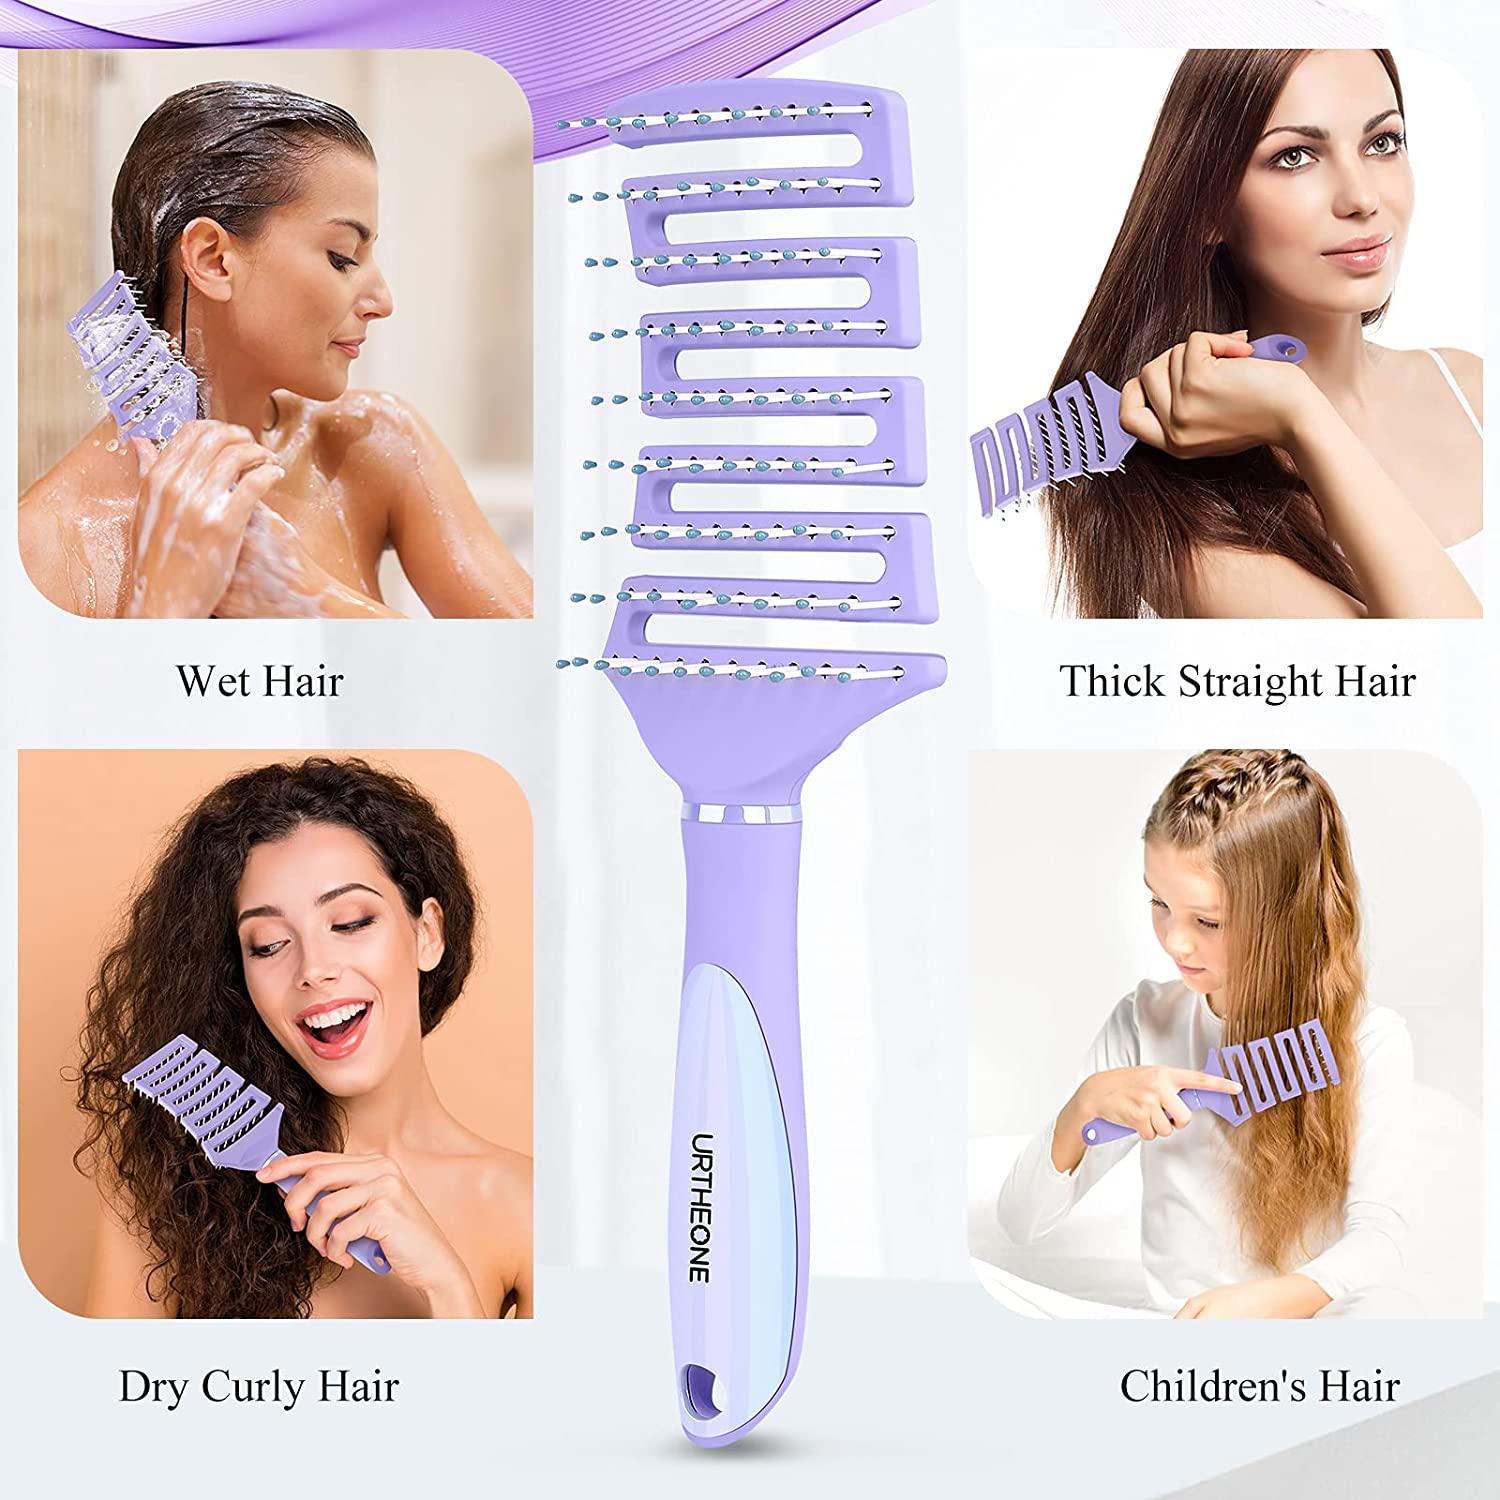 Hair Brush, Curved Vented Detangling Hair Brushes for Women Men Wet or Dry  Hair,Faster Blow Drying Styling Professional Paddle Vent detangler brush  for Curly Thick Wavy Thin Fine Long Short Hair purple